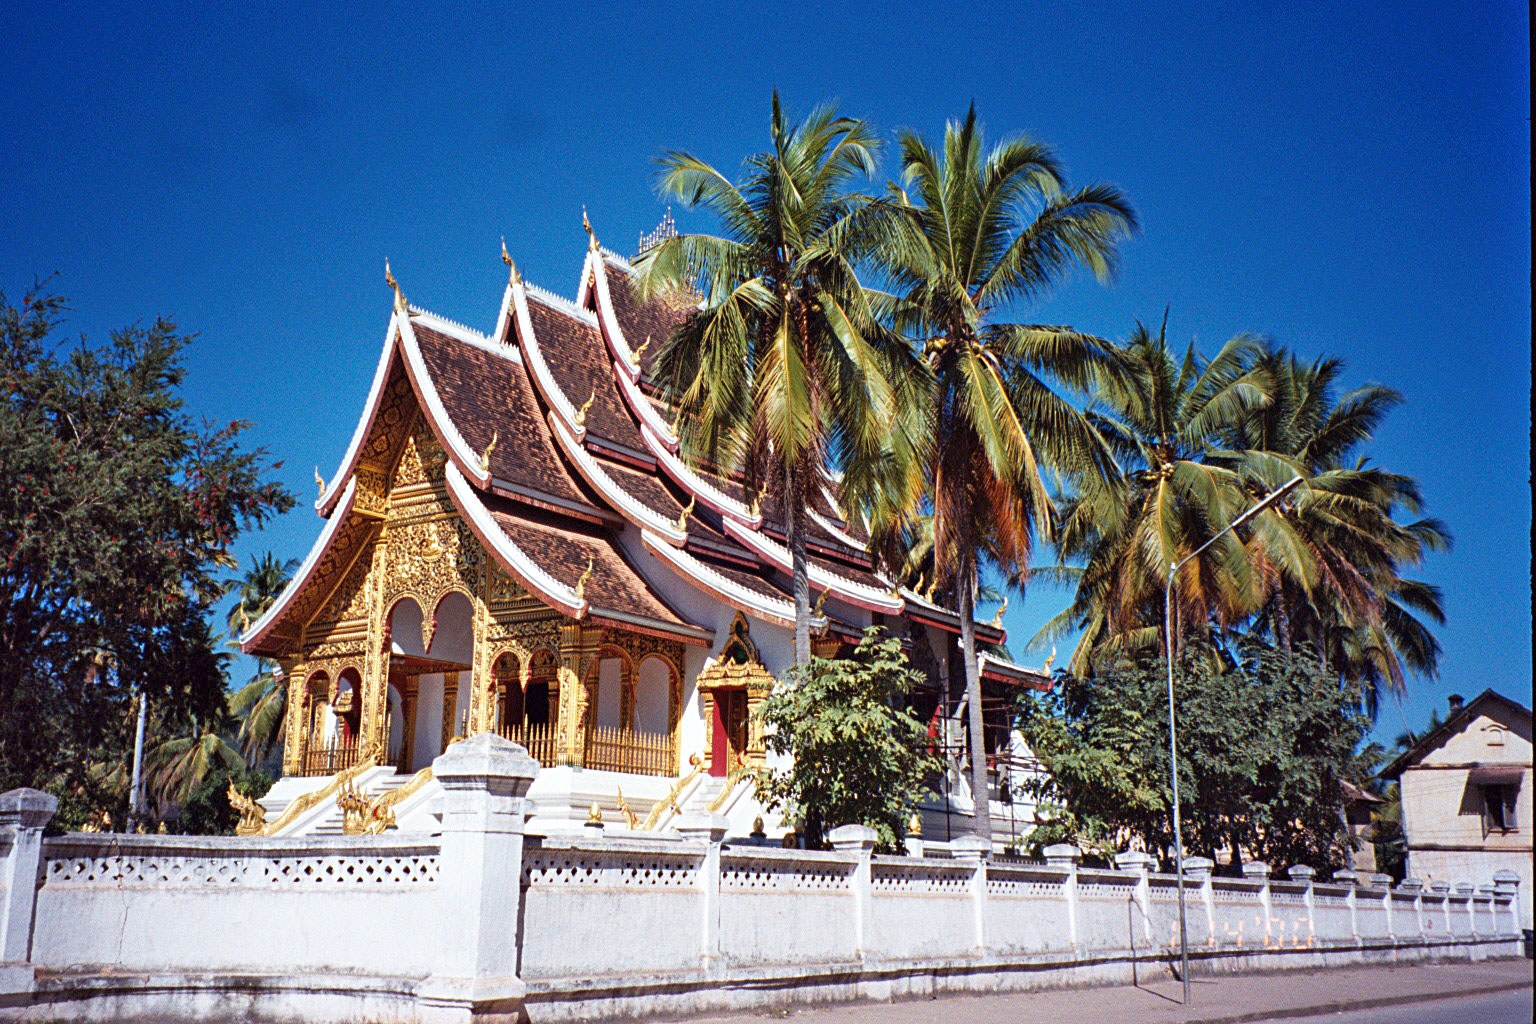 Wat Mai Suwannaphumaham is one of many temples and wats in Luang Prabang